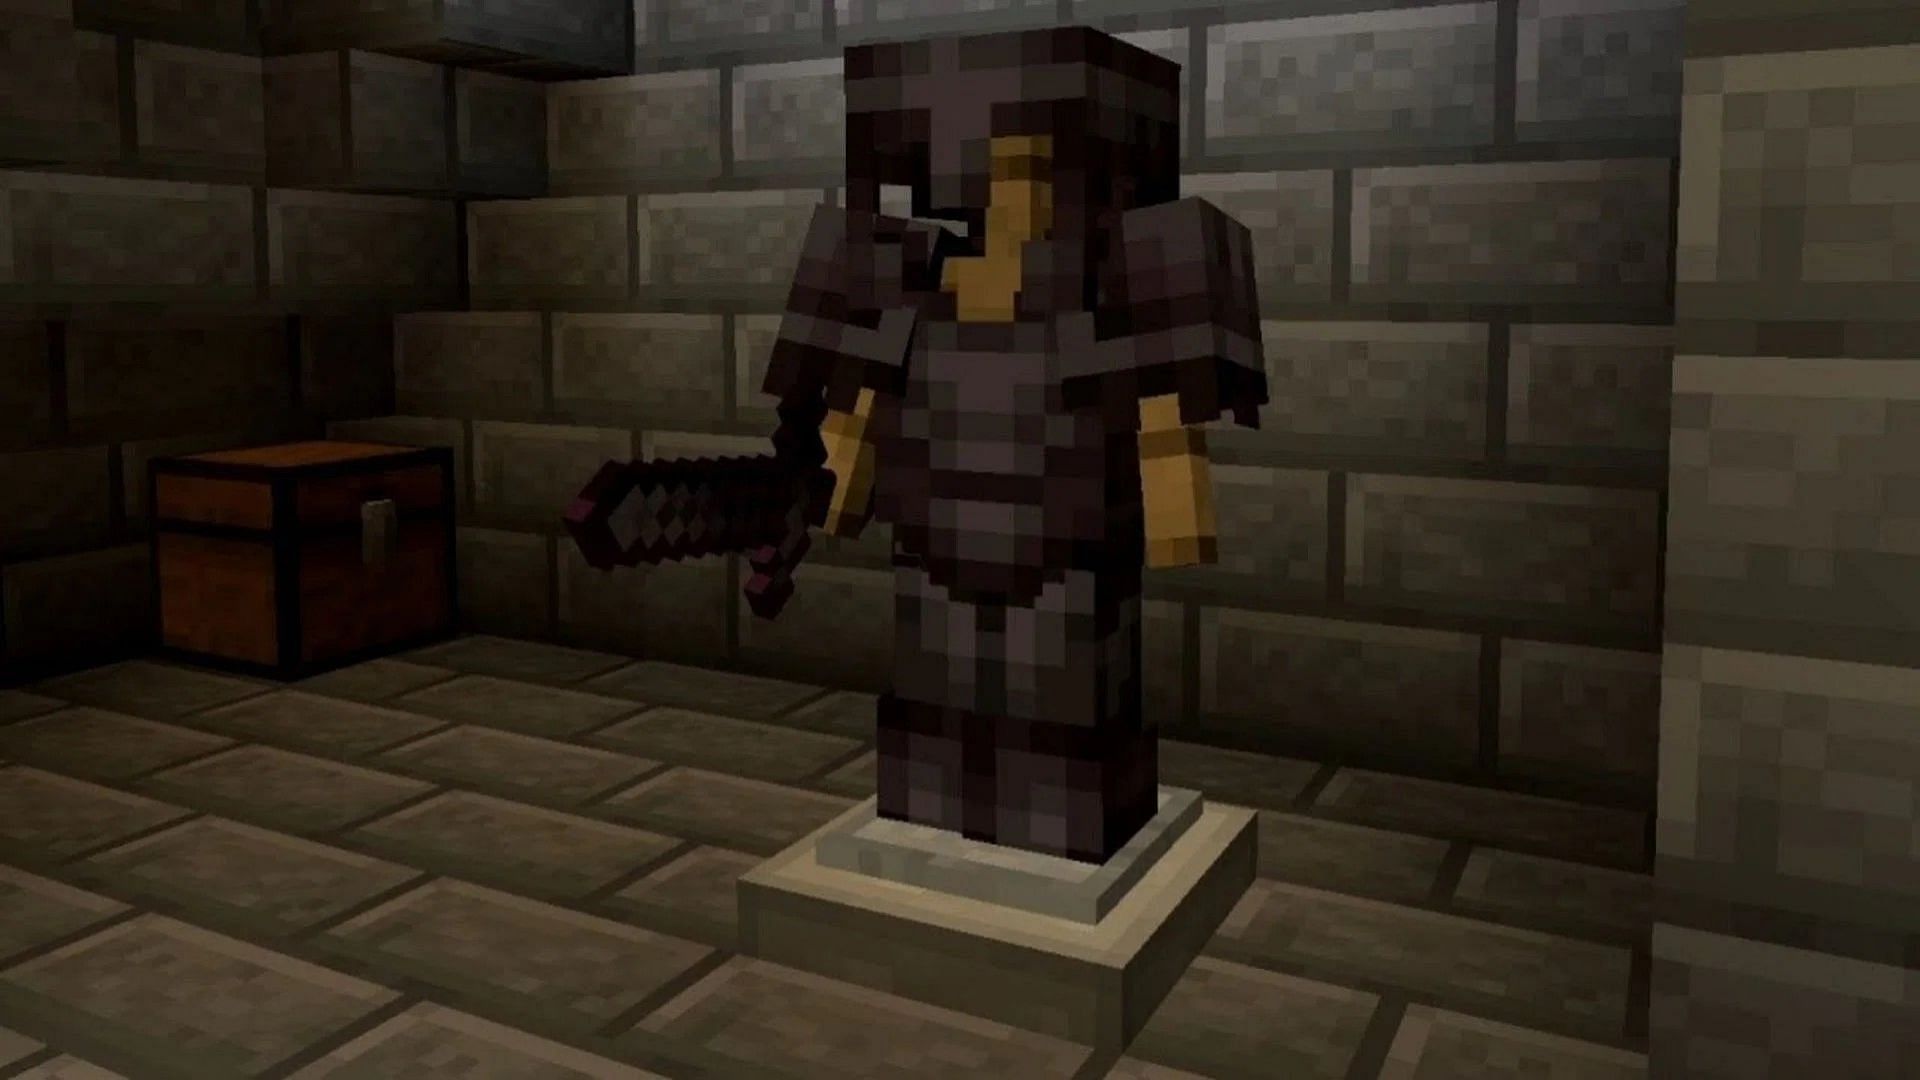 Netherite armor rests upon an armor stand in Minecraft (Image via AserGaming/YouTube)